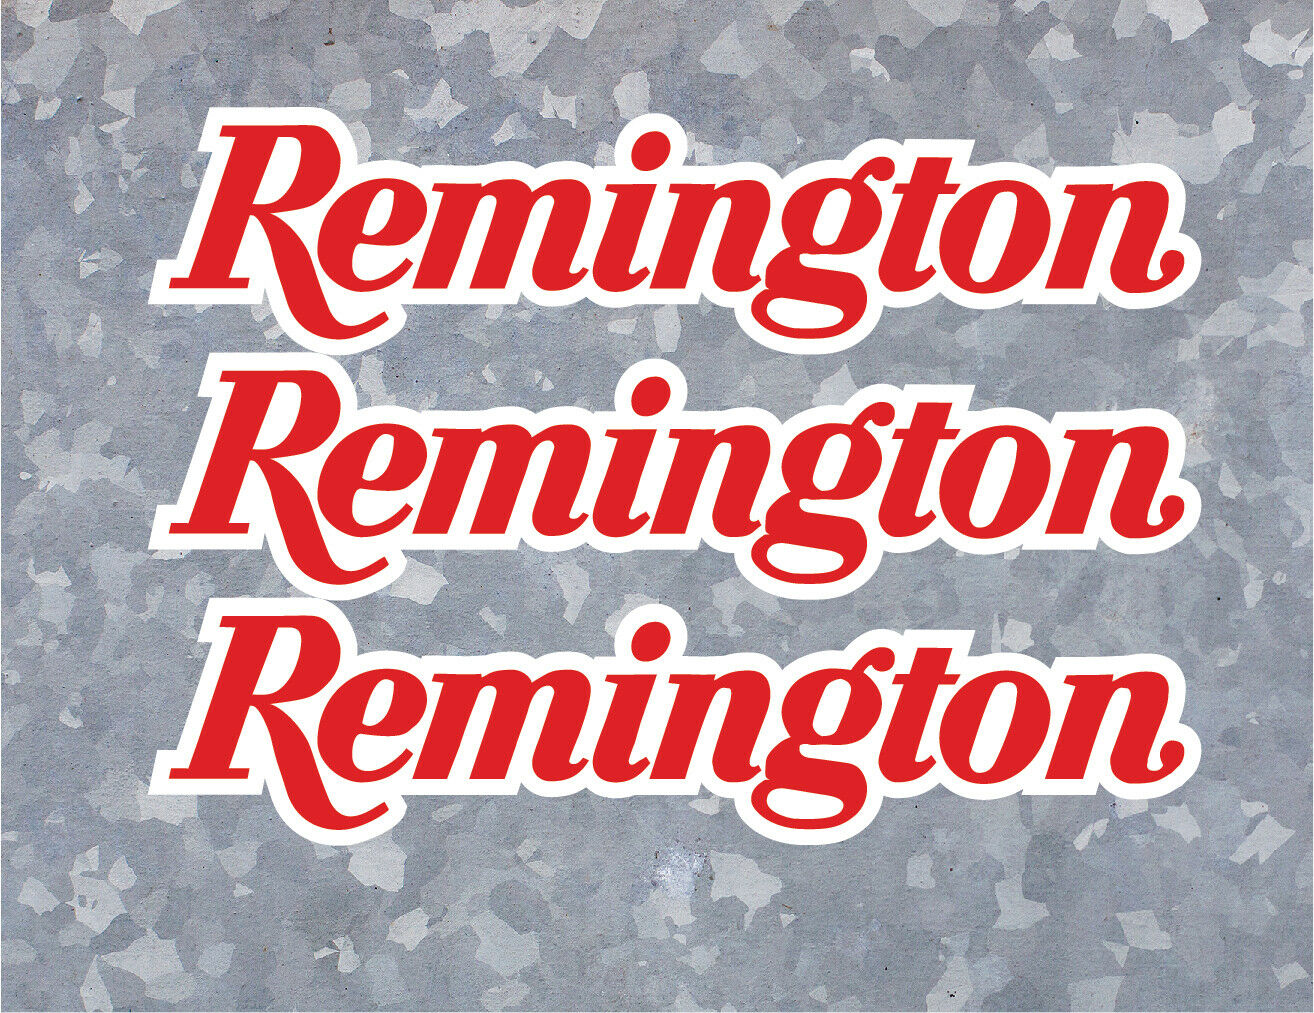 2x Remington Vinyl Decal - Indoor Outdoor - High Quality 6 mil Peel and Stick